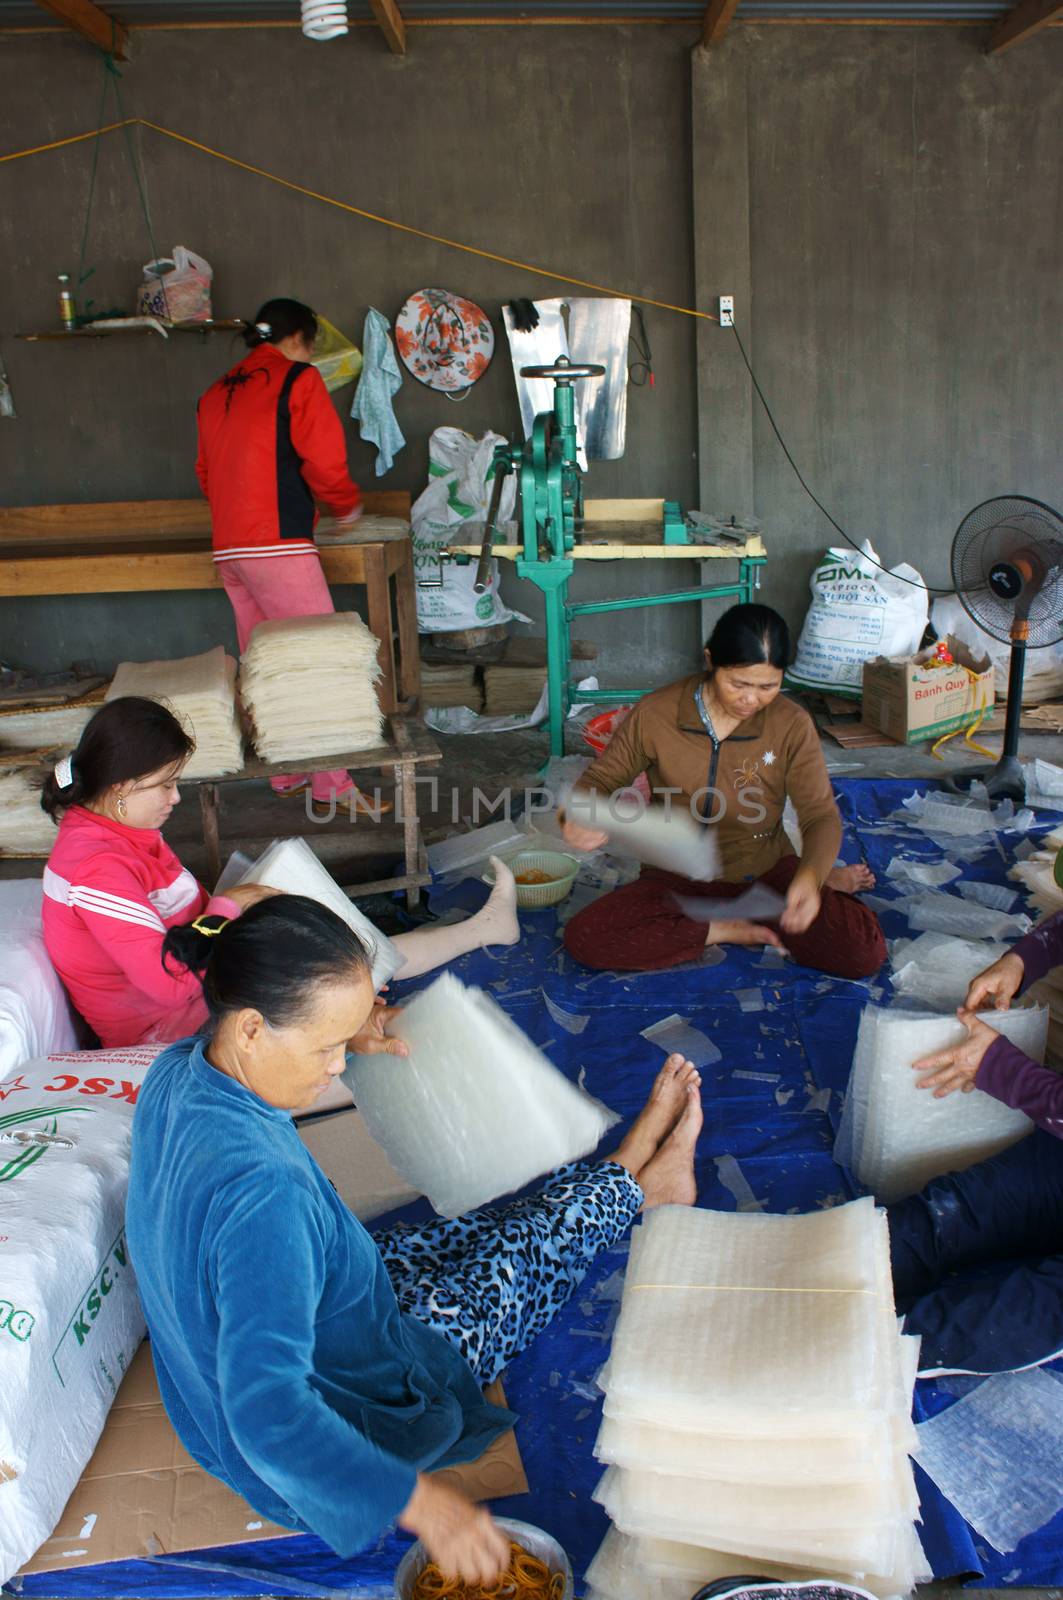 BINH THUAN, VIET NAM- FEBRUARY 4: People working in group at girdle cake  workshop in Binh Thuan, VietNam on February 4, 2013